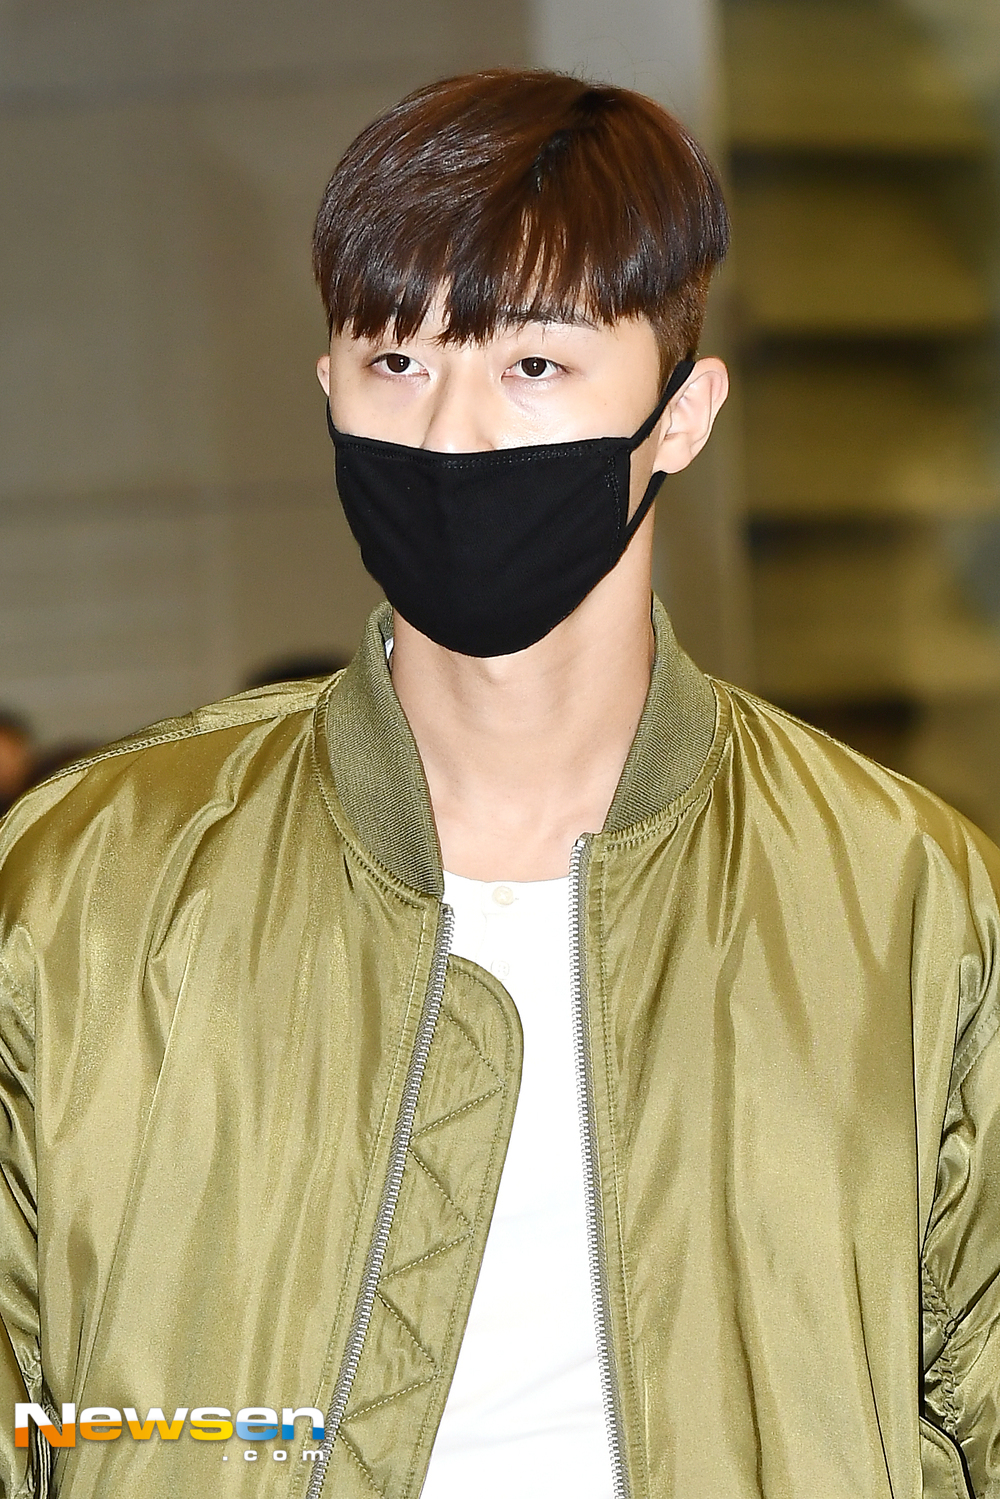 Actor Park Seo-joon arrived at Incheon International Airport in Unseo-dong, Jung-gu, Incheon on the afternoon of January 15 after finishing the AD shooting.Actor Park Seo-joon is entering the country with an airport fashion.exponential earthquake